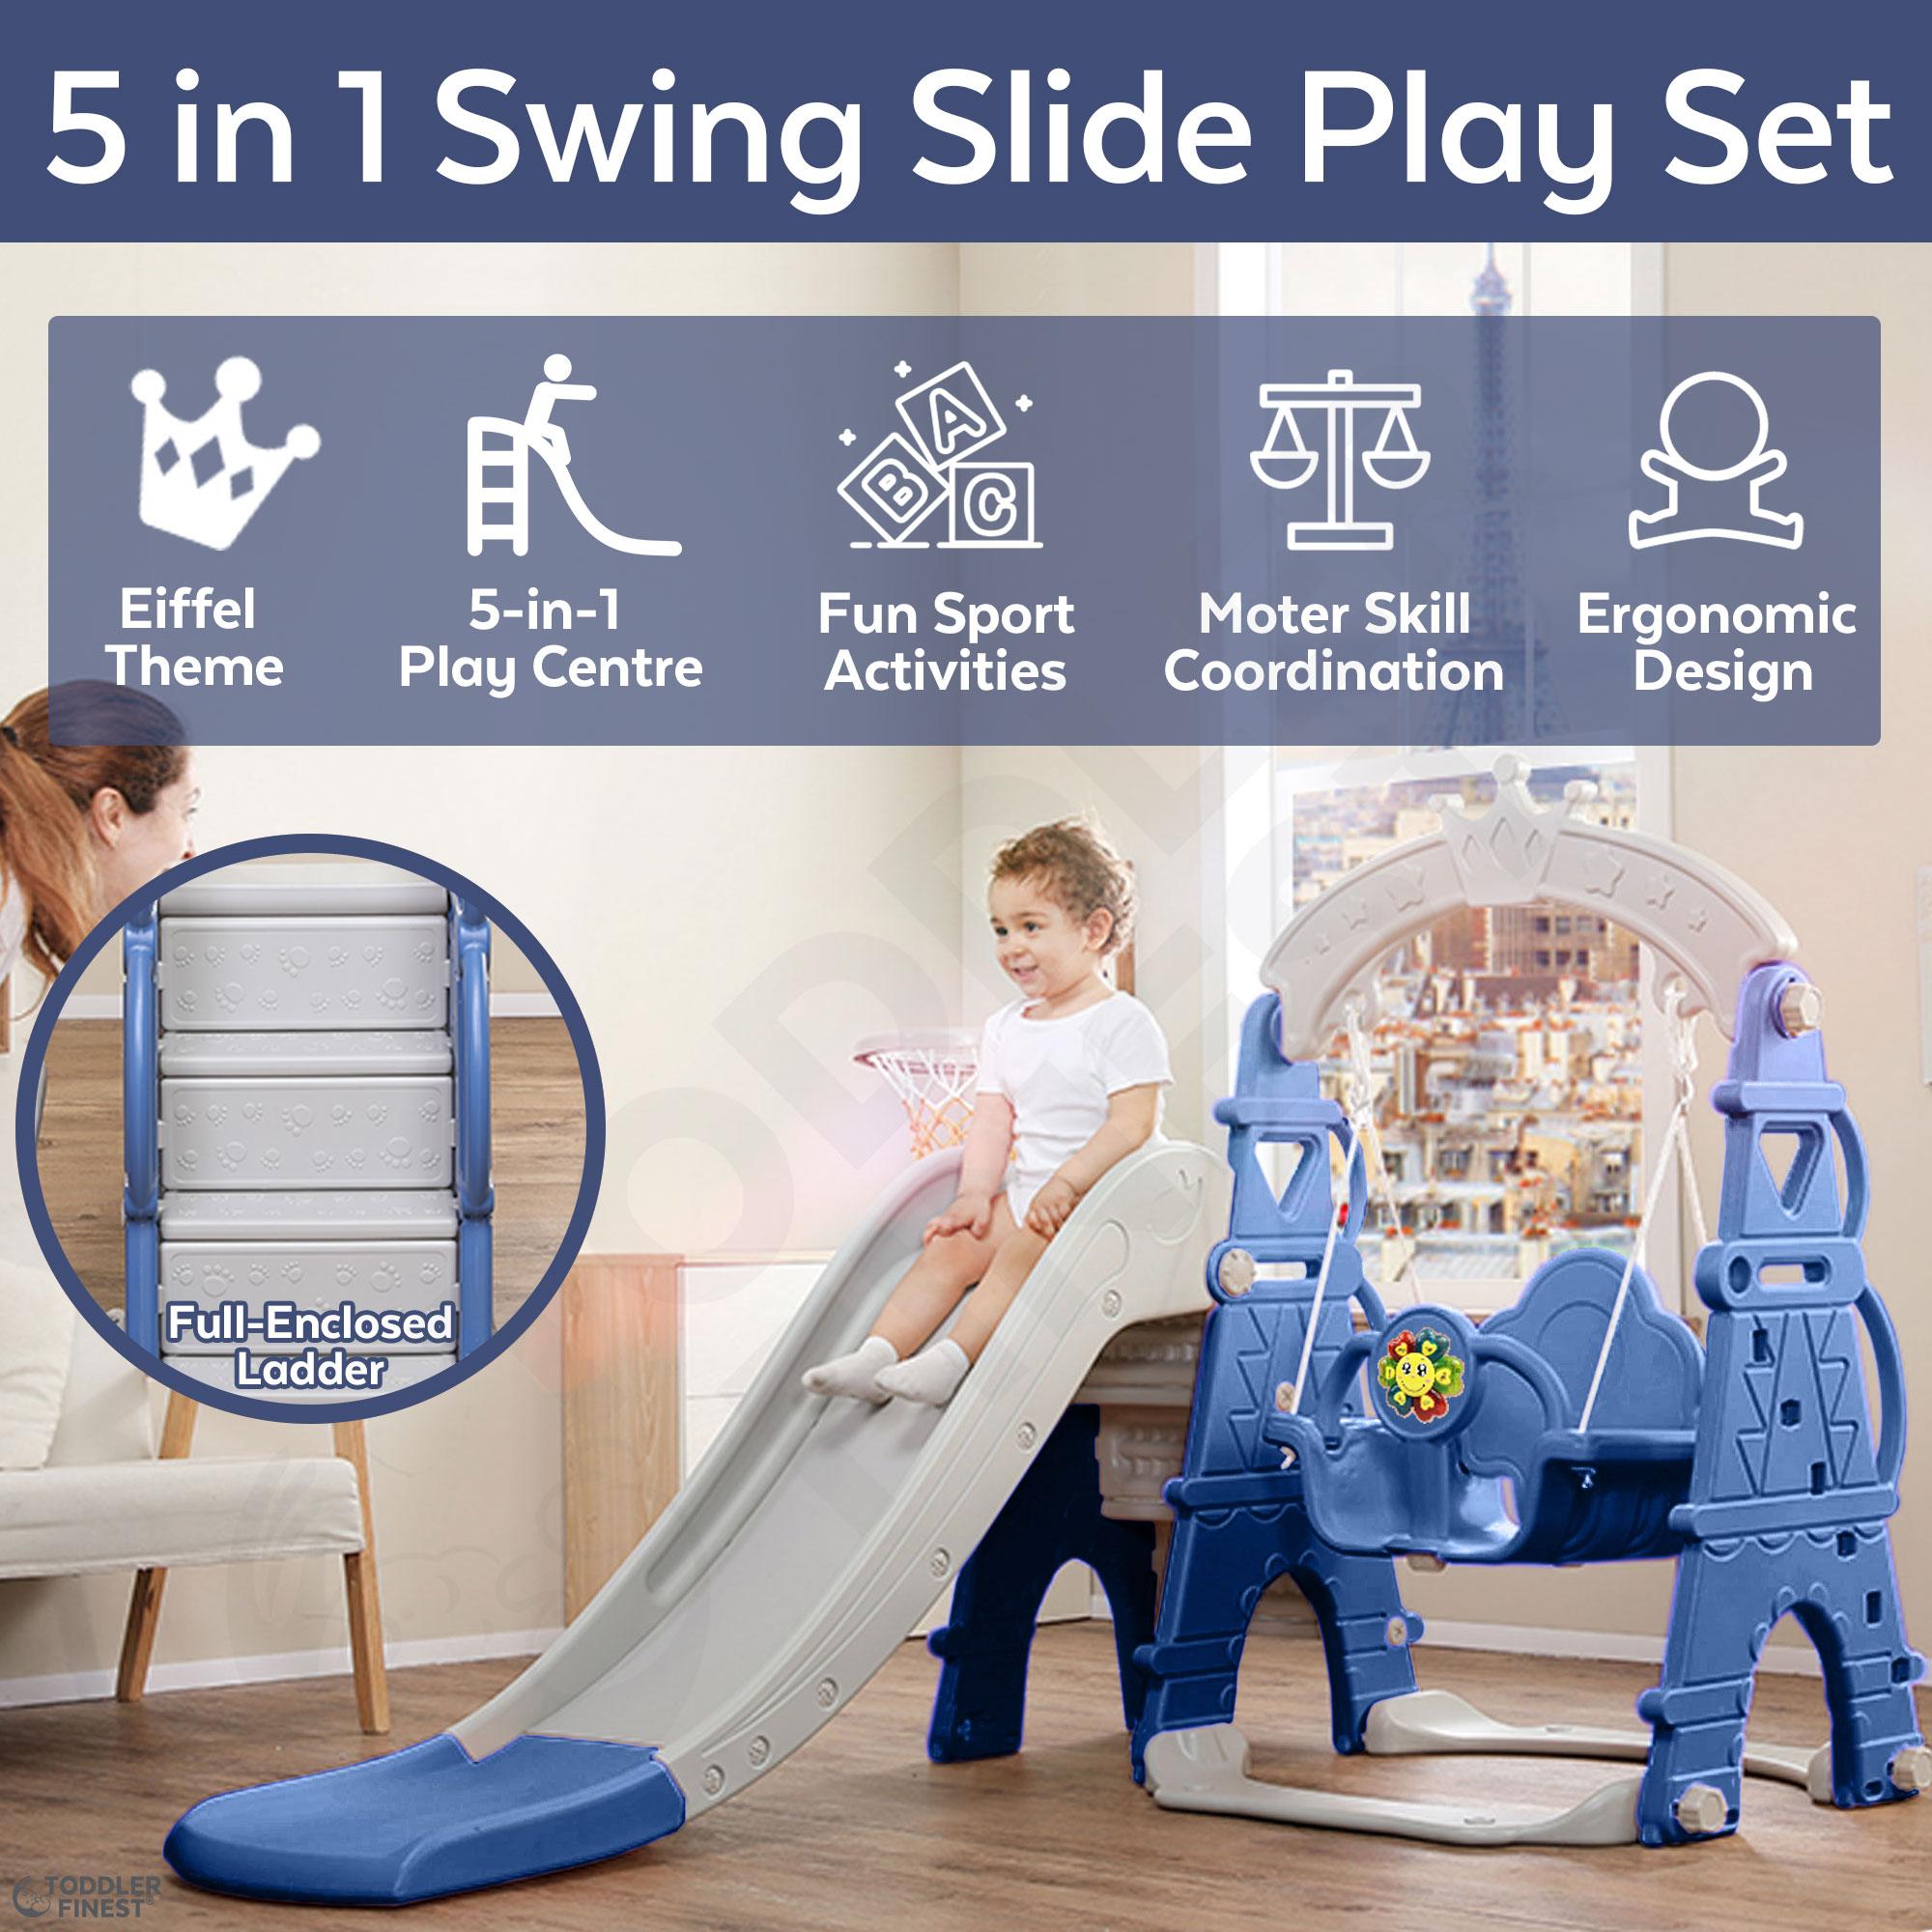 papasbox 5 in 1 Toddler Climber and Swing Set Kids Play Climber Slide Playset with Basketball Hoop Easy Set Up Baby Playset for Indoor Outdoor Backyard Extra Long Slide and Ball 